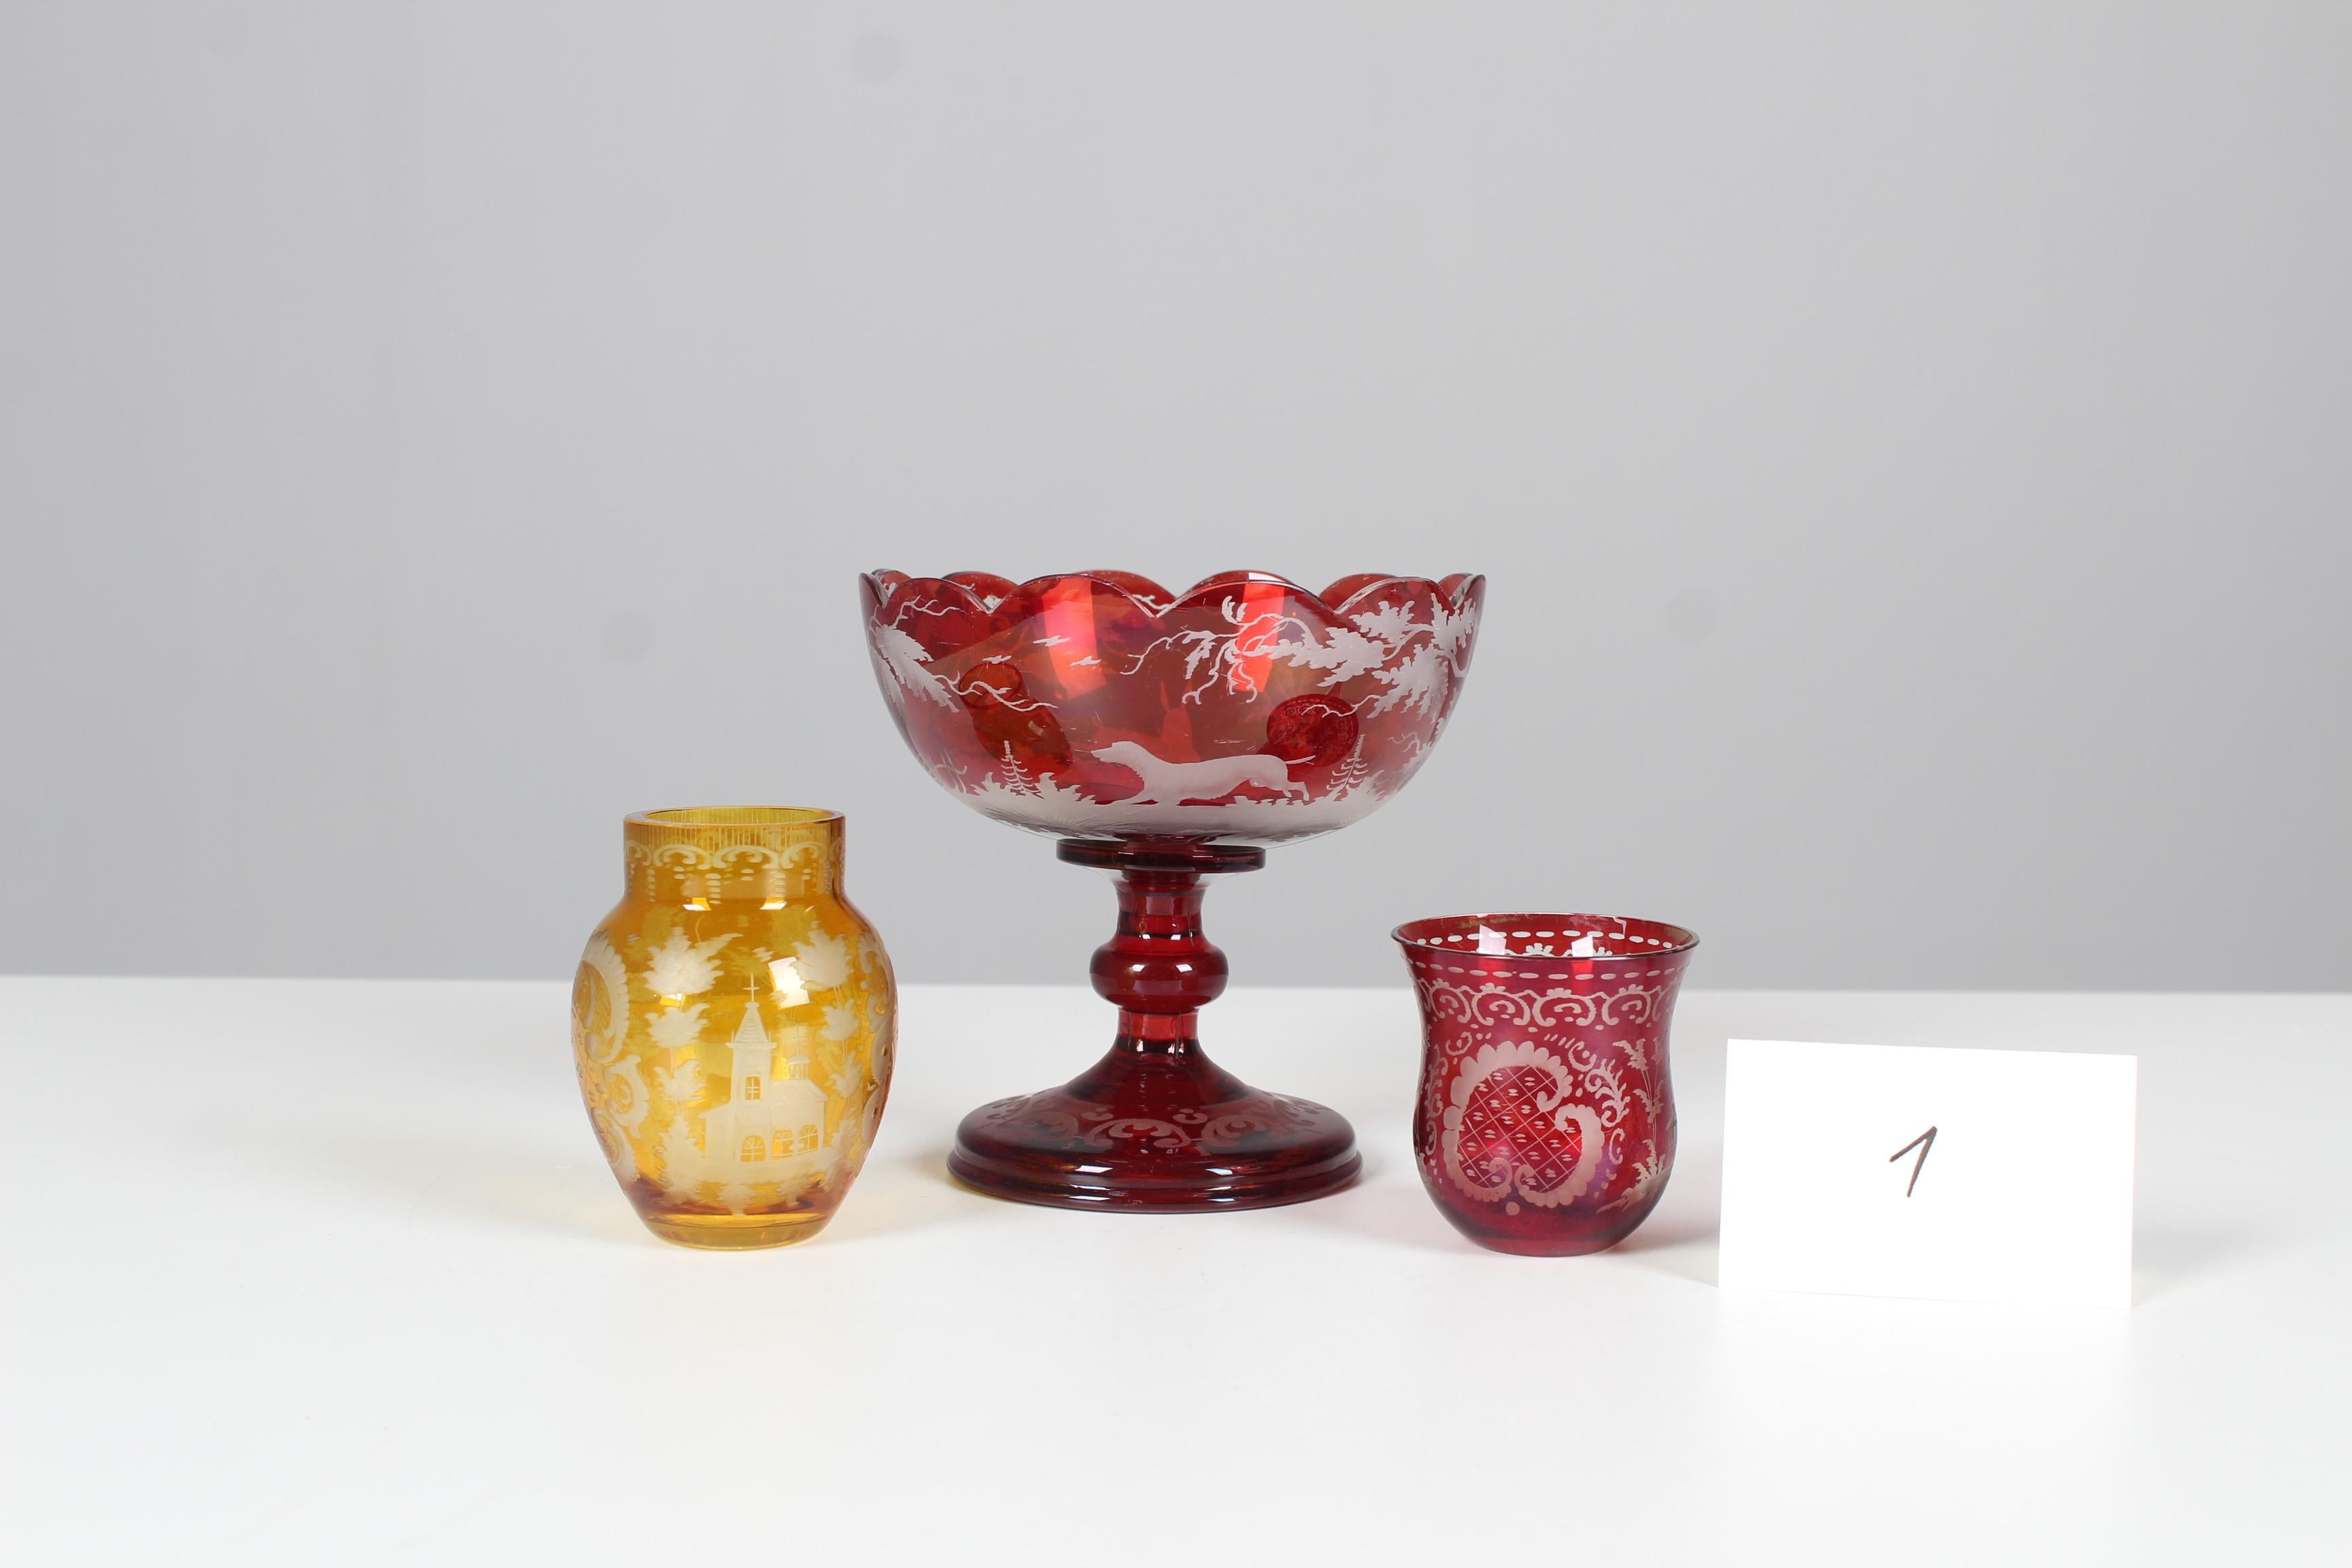 German Antique Bohemian Glass Set, circa 1880, Bohemian Crystal, Ruby Red and Yellow For Sale